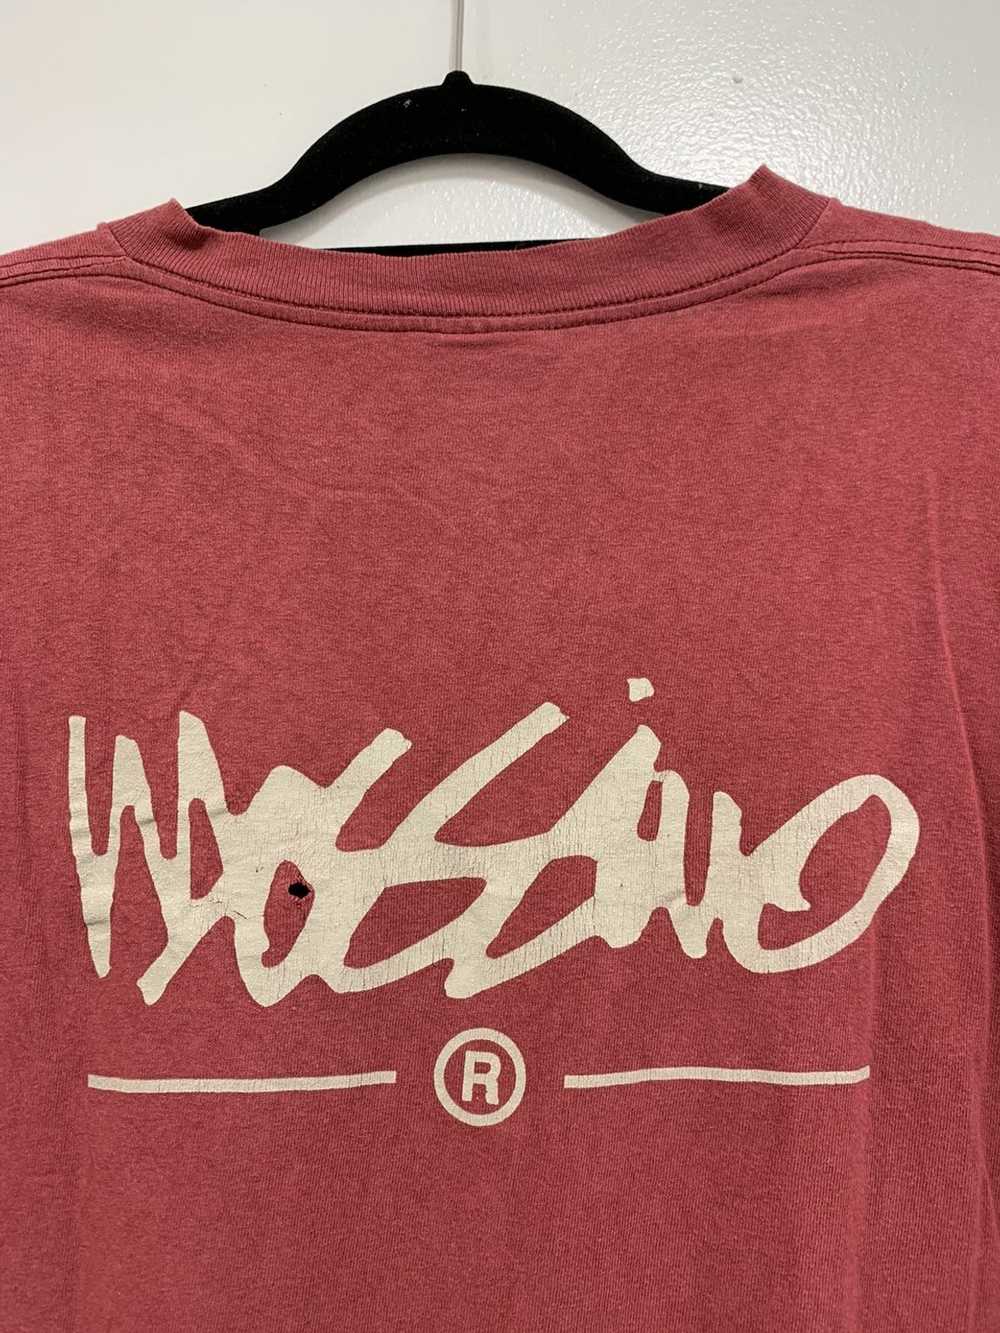 Made In Usa × Mossimo × Vintage Vintage mossimo t… - image 5